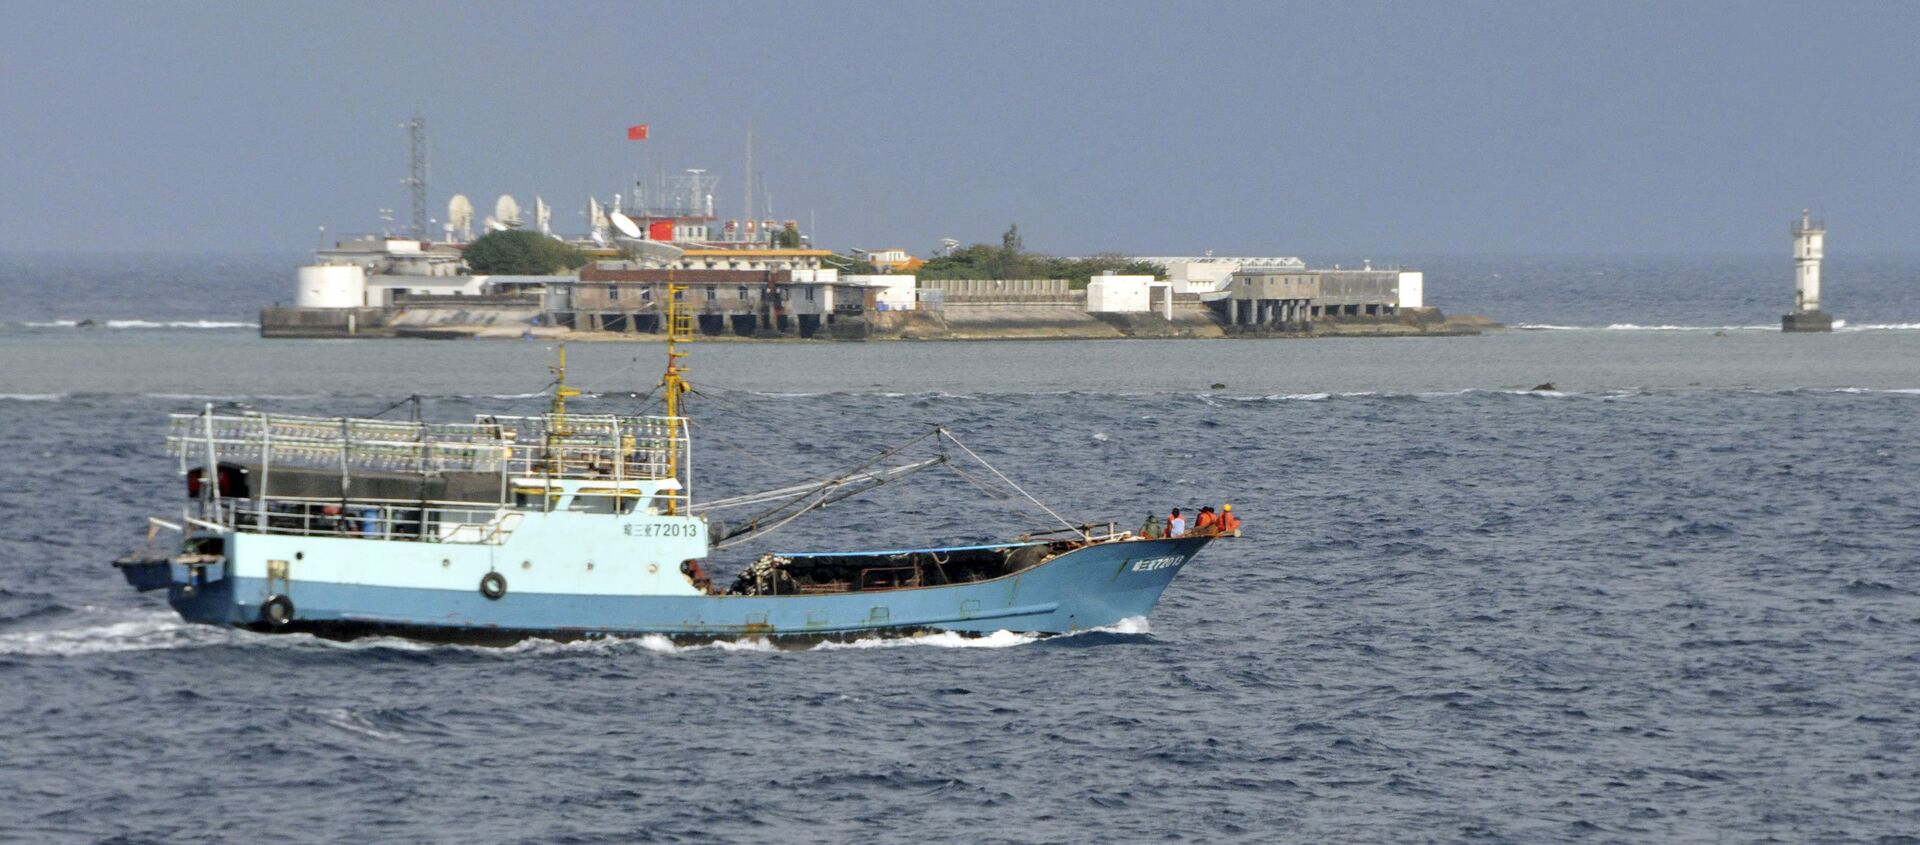 Chinese fishing vessel sails by Fiery Cross Reef, background, also known as Yongshu Reef, of the Spratly Islands in South China Sea. File photo. - Sputnik International, 1920, 23.03.2021